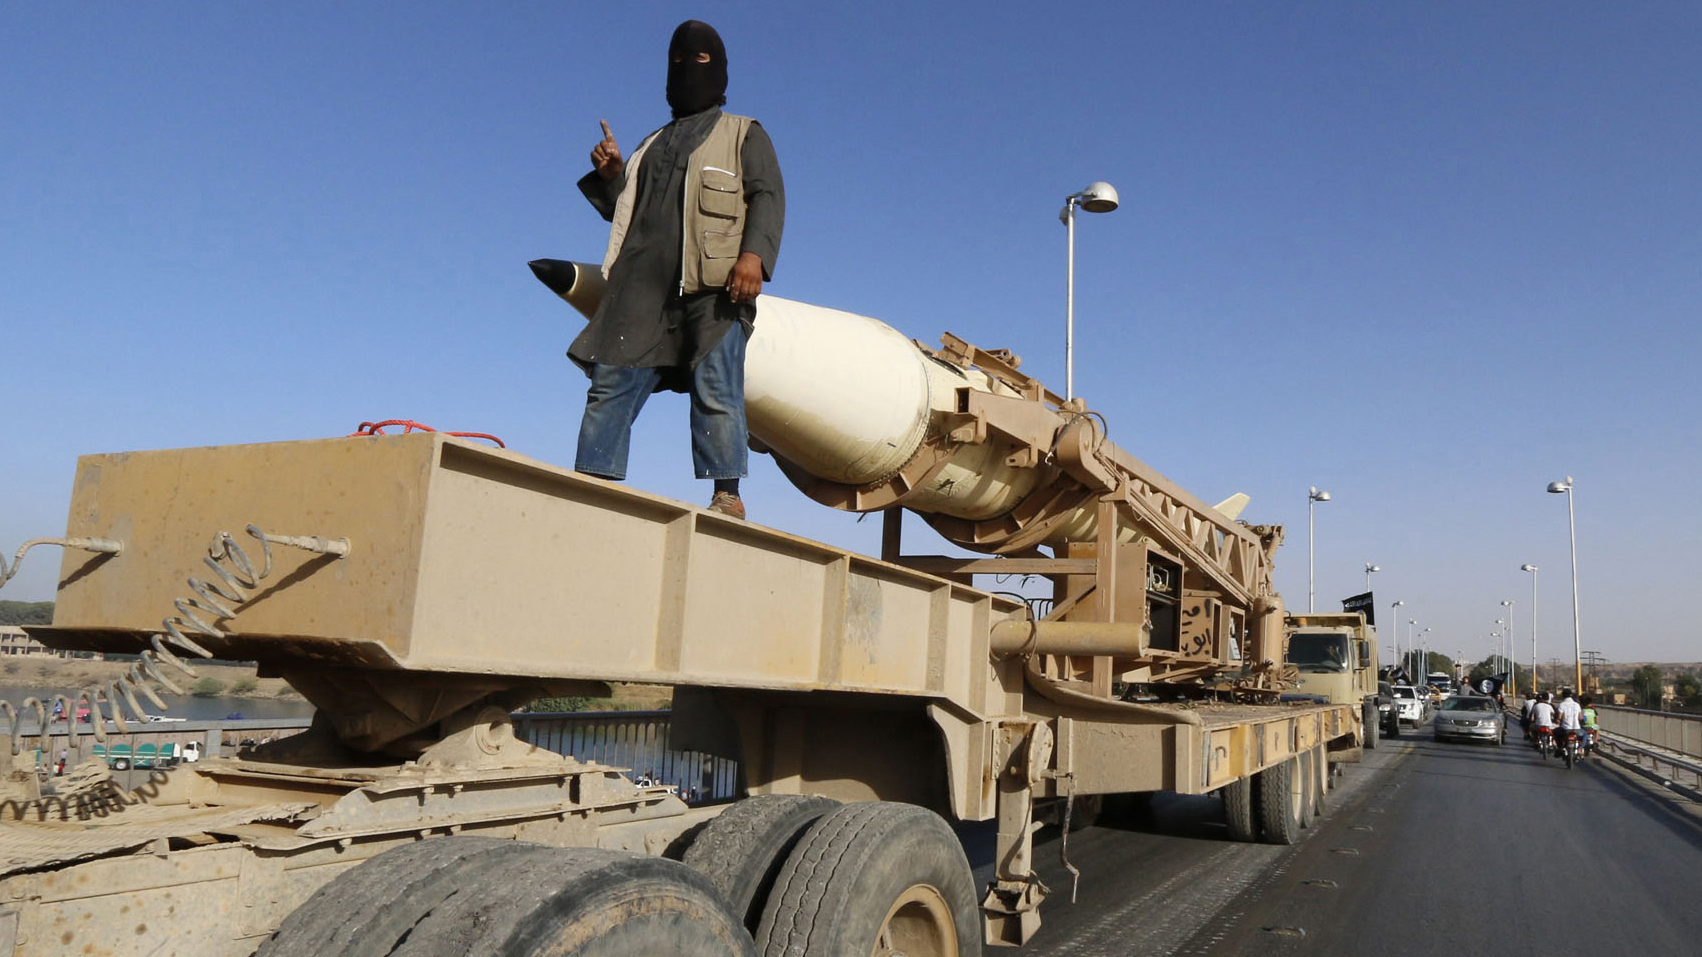 Smugglers trying to sell nuclear materials to ISIS?